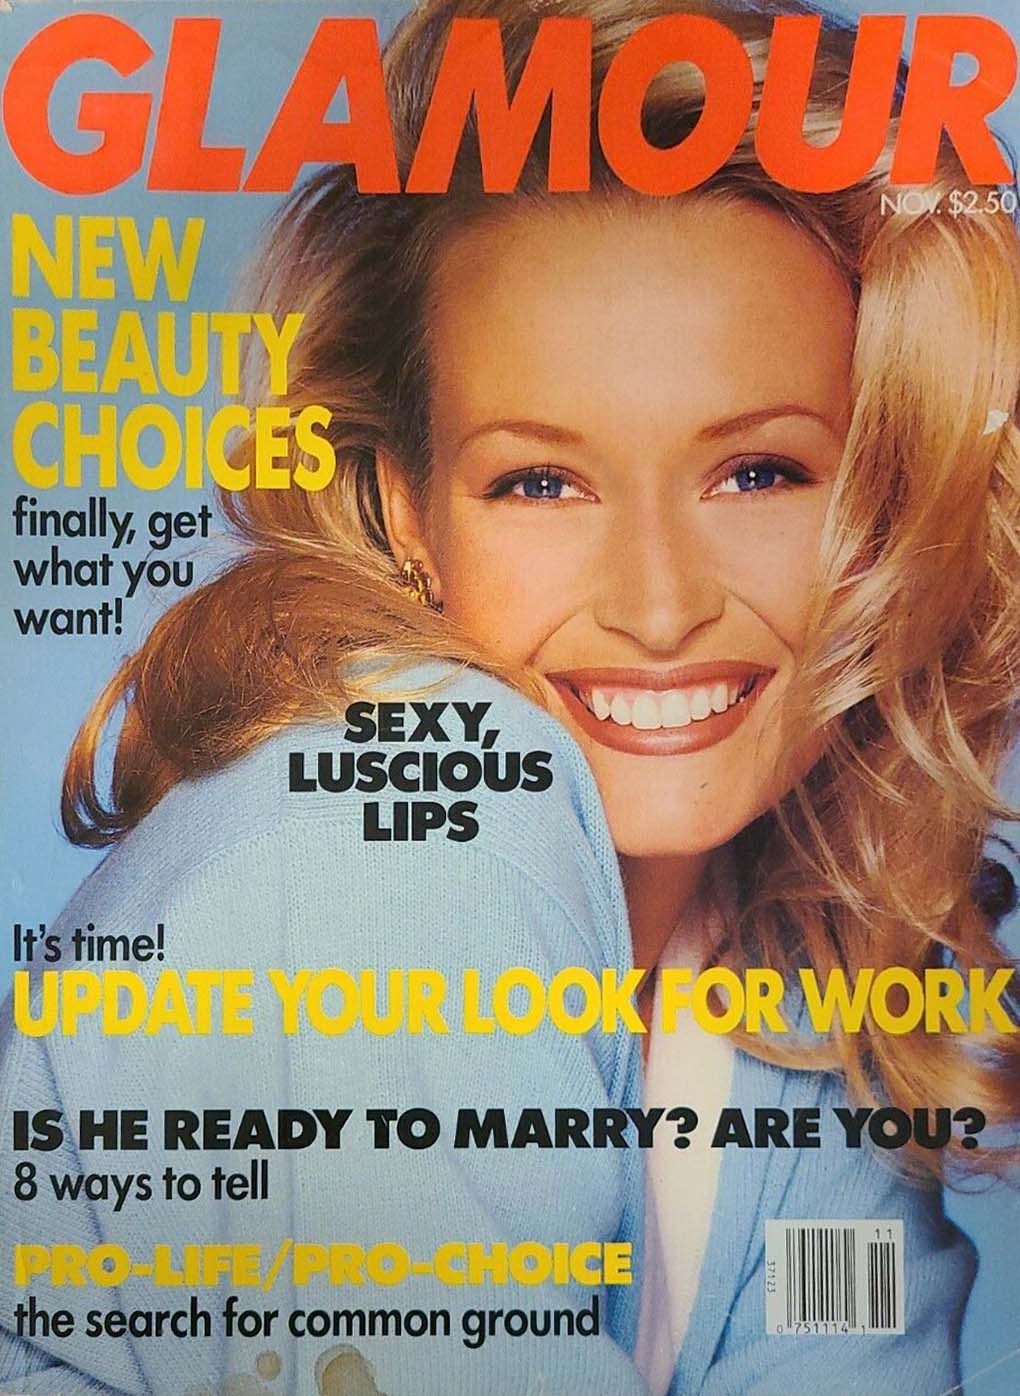 Glamour November 1992 magazine back issue Glamour magizine back copy Glamour November 1992 Womens Magazine Back Issue Published by Conde Nast Publications. New Beauty Choices Finally, Get What You Want!.